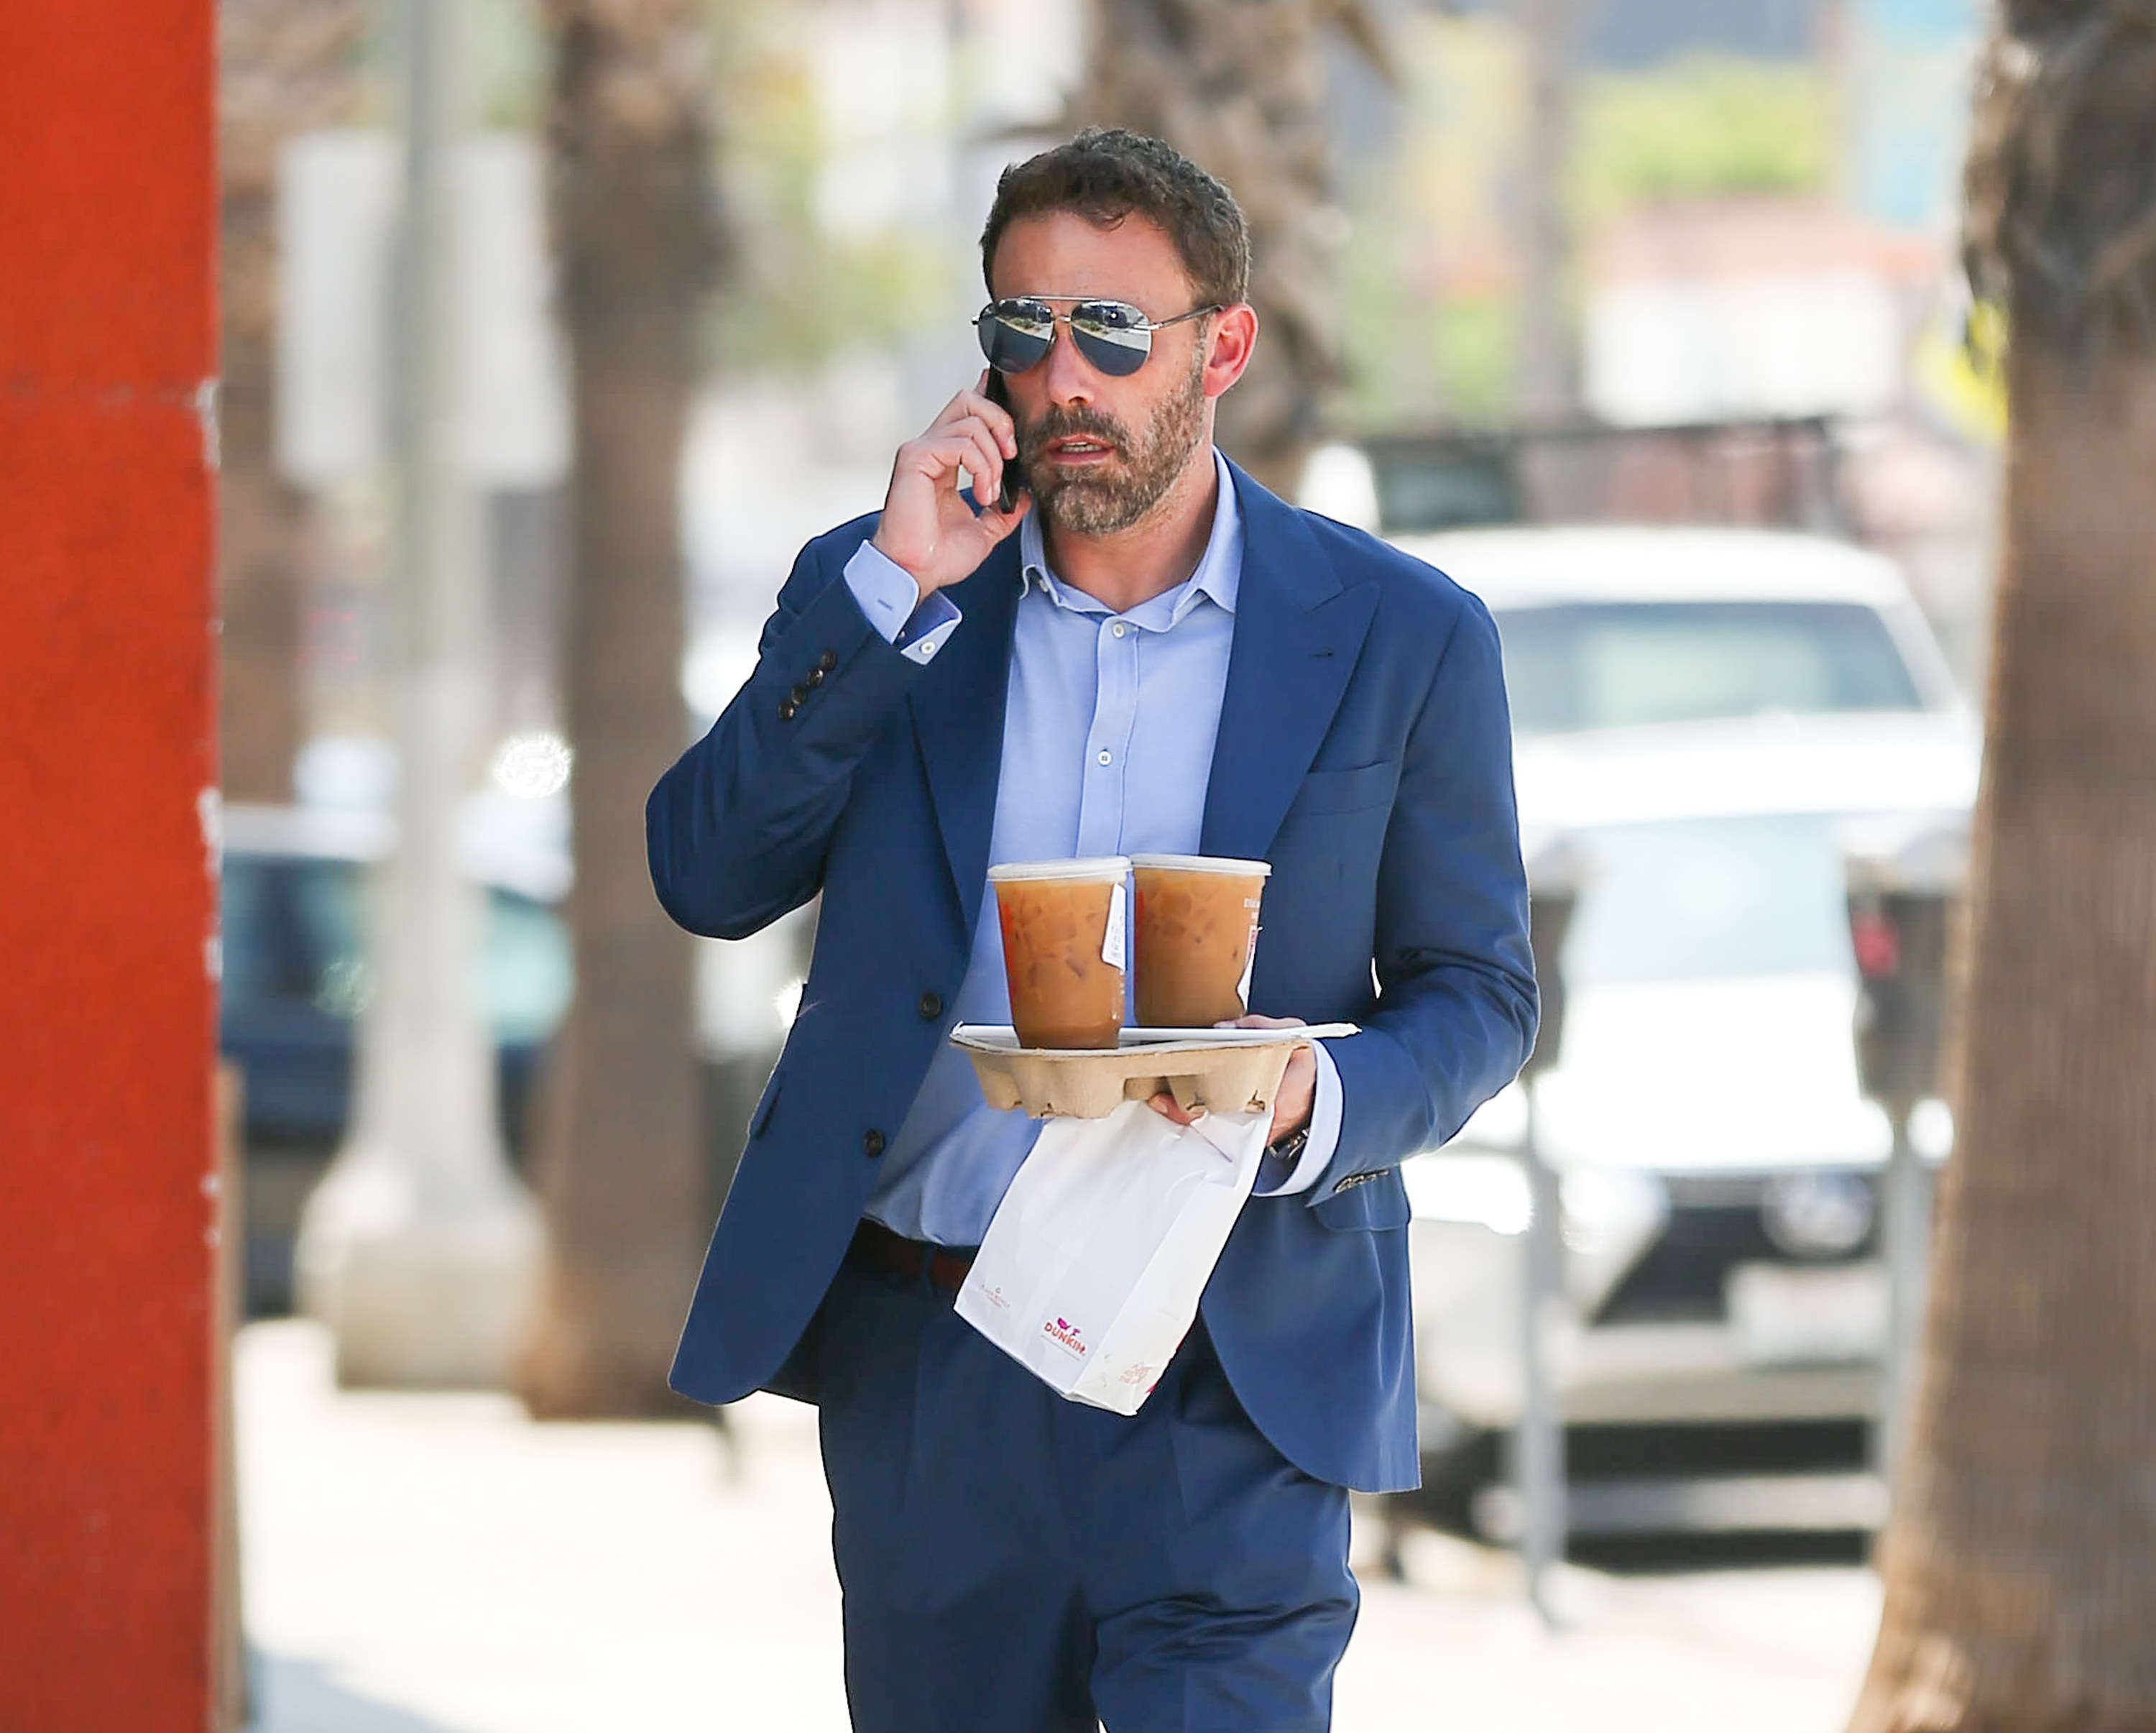 Ben on the phone and holding a takeout tray with two coffees in it